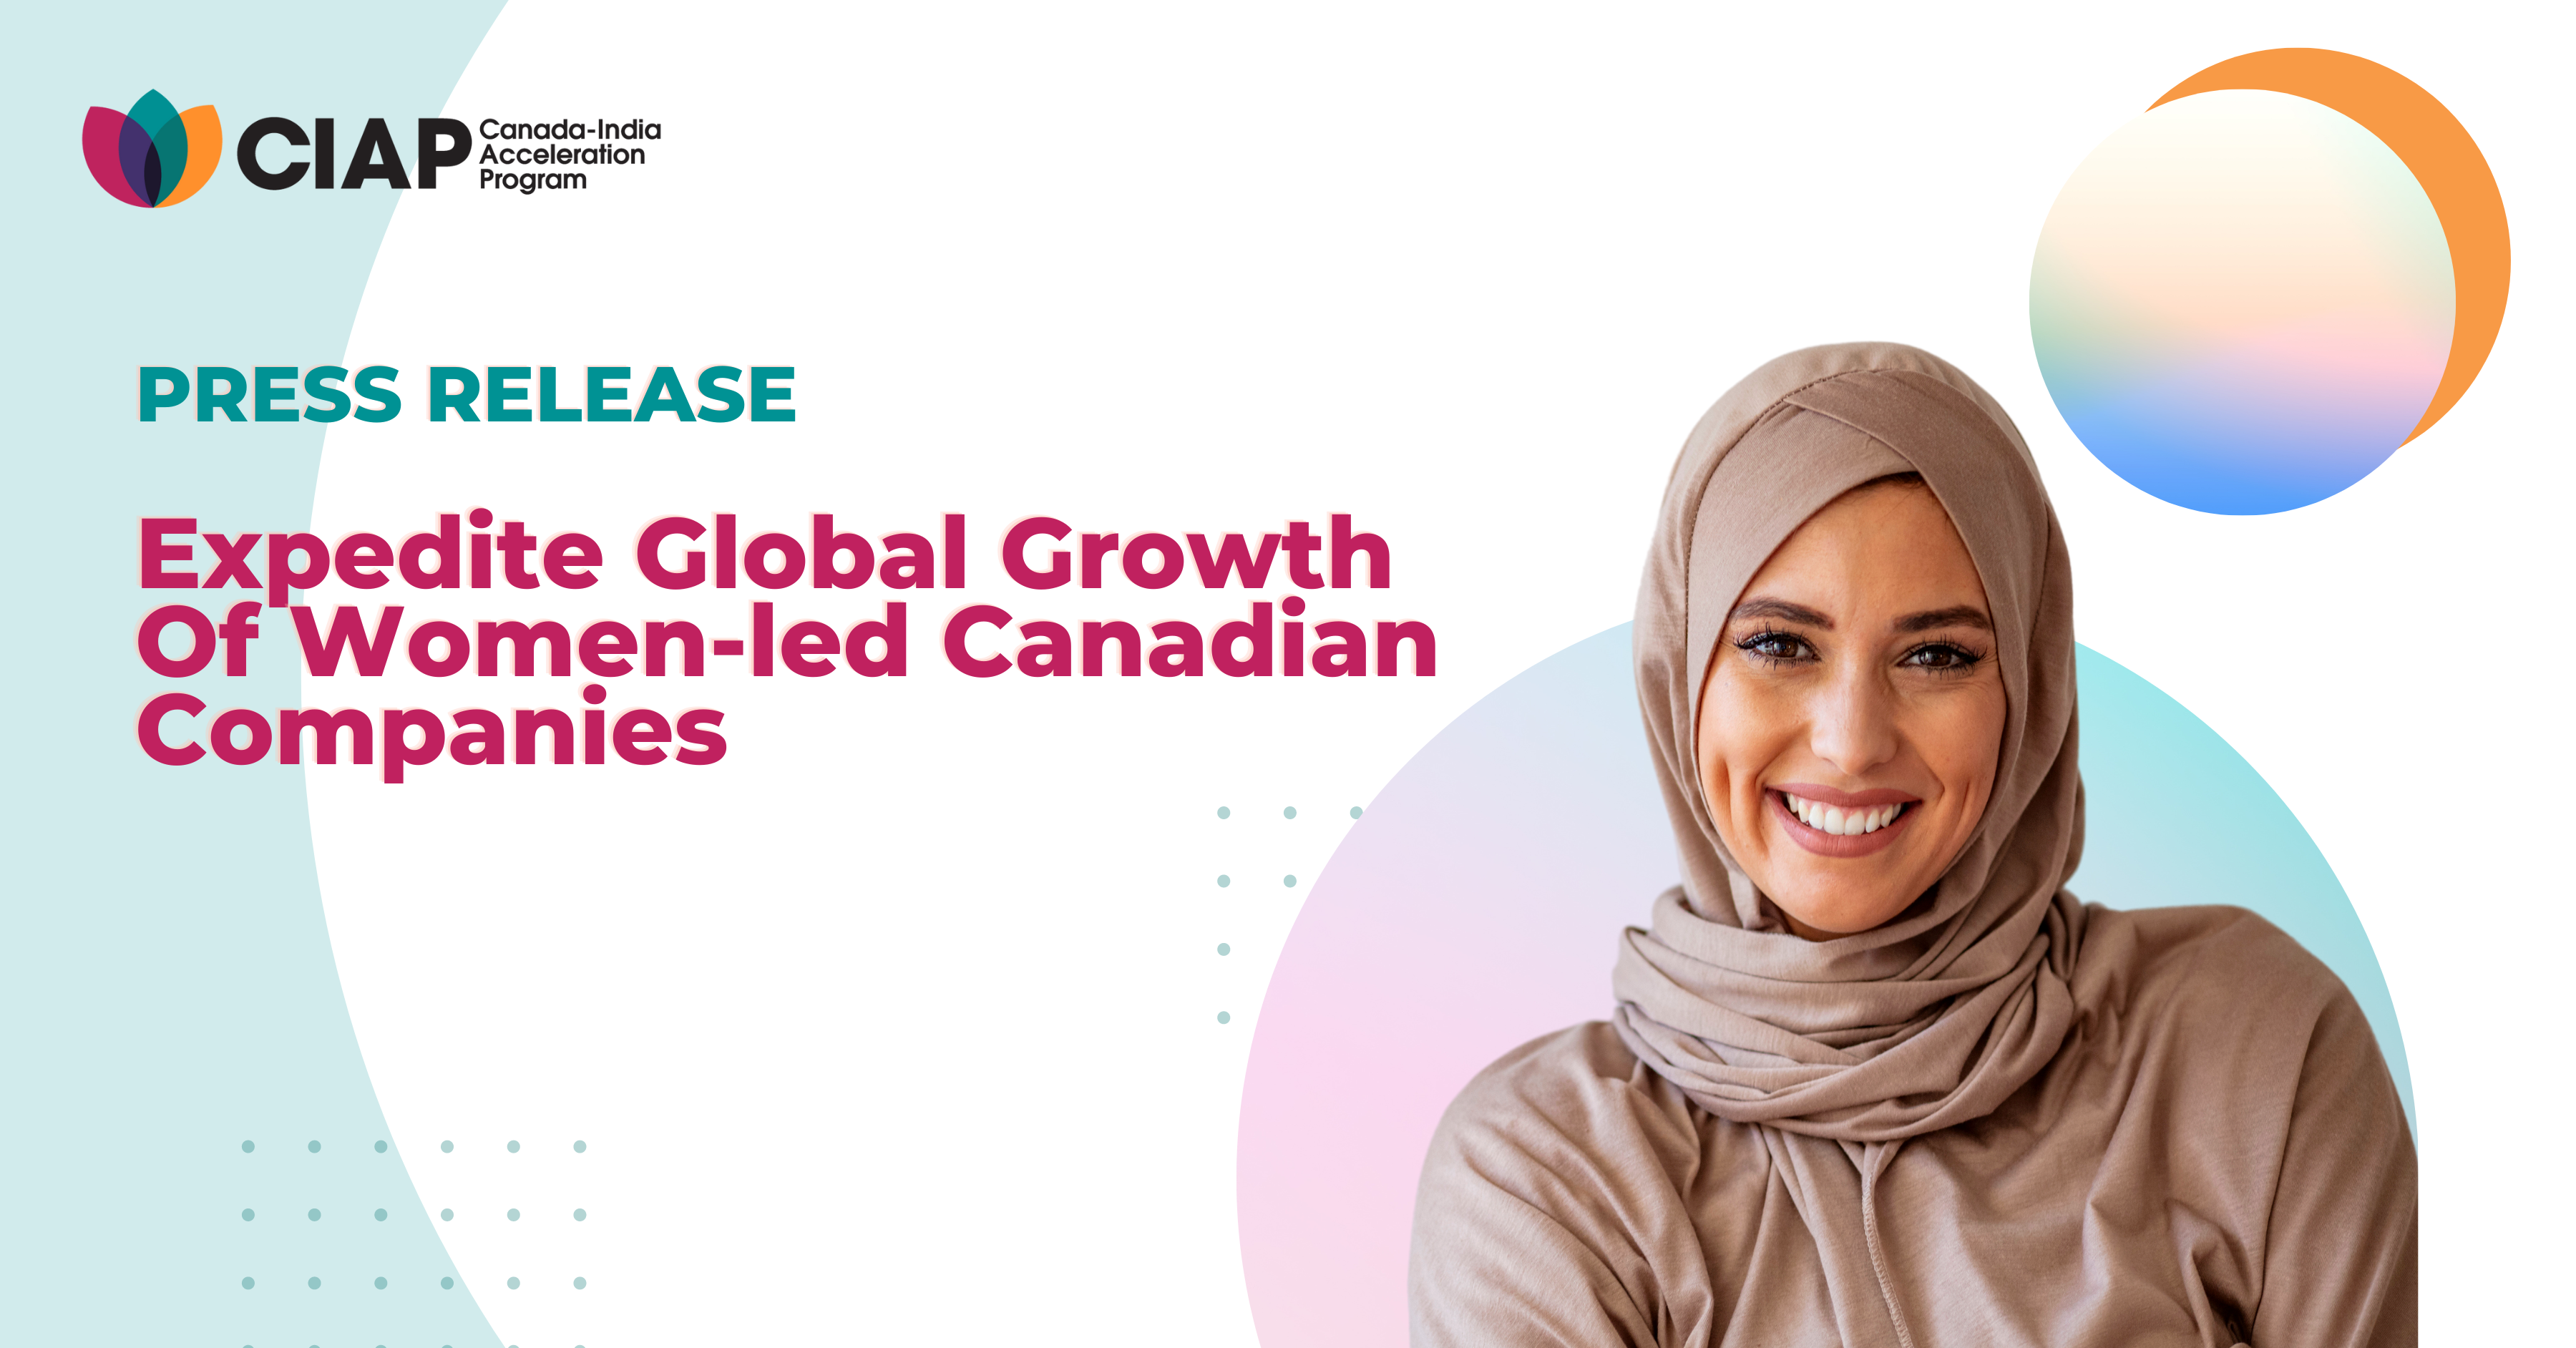 The Canada-India Acceleration Program Has Returned To Expedite The Global Growth Of Women-Led Canadian Companies